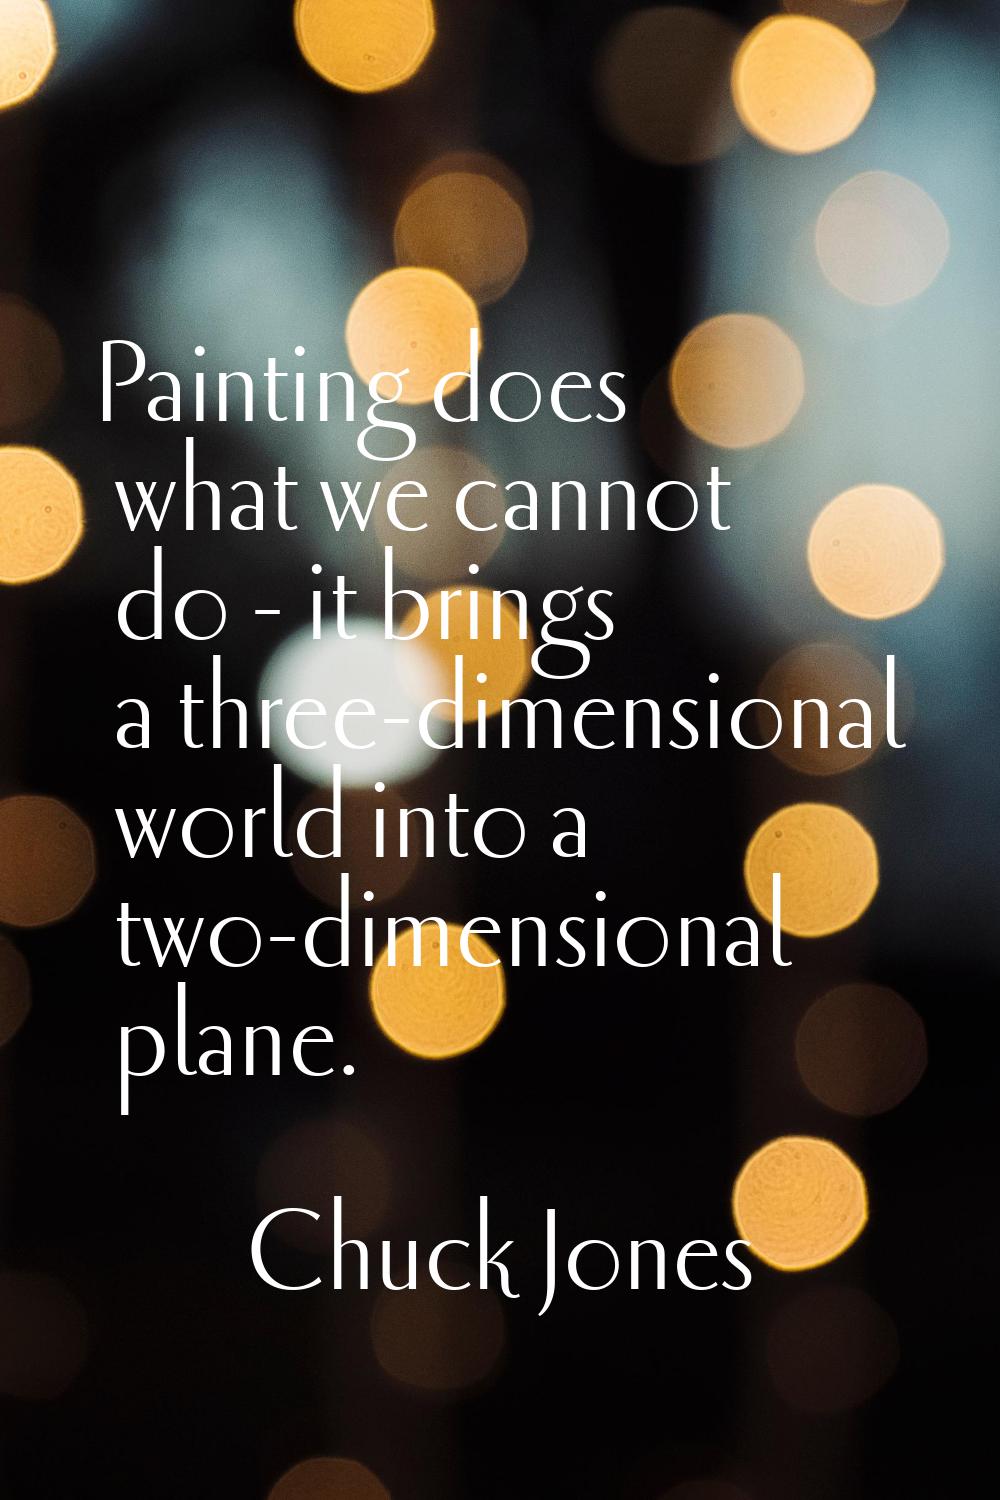 Painting does what we cannot do - it brings a three-dimensional world into a two-dimensional plane.